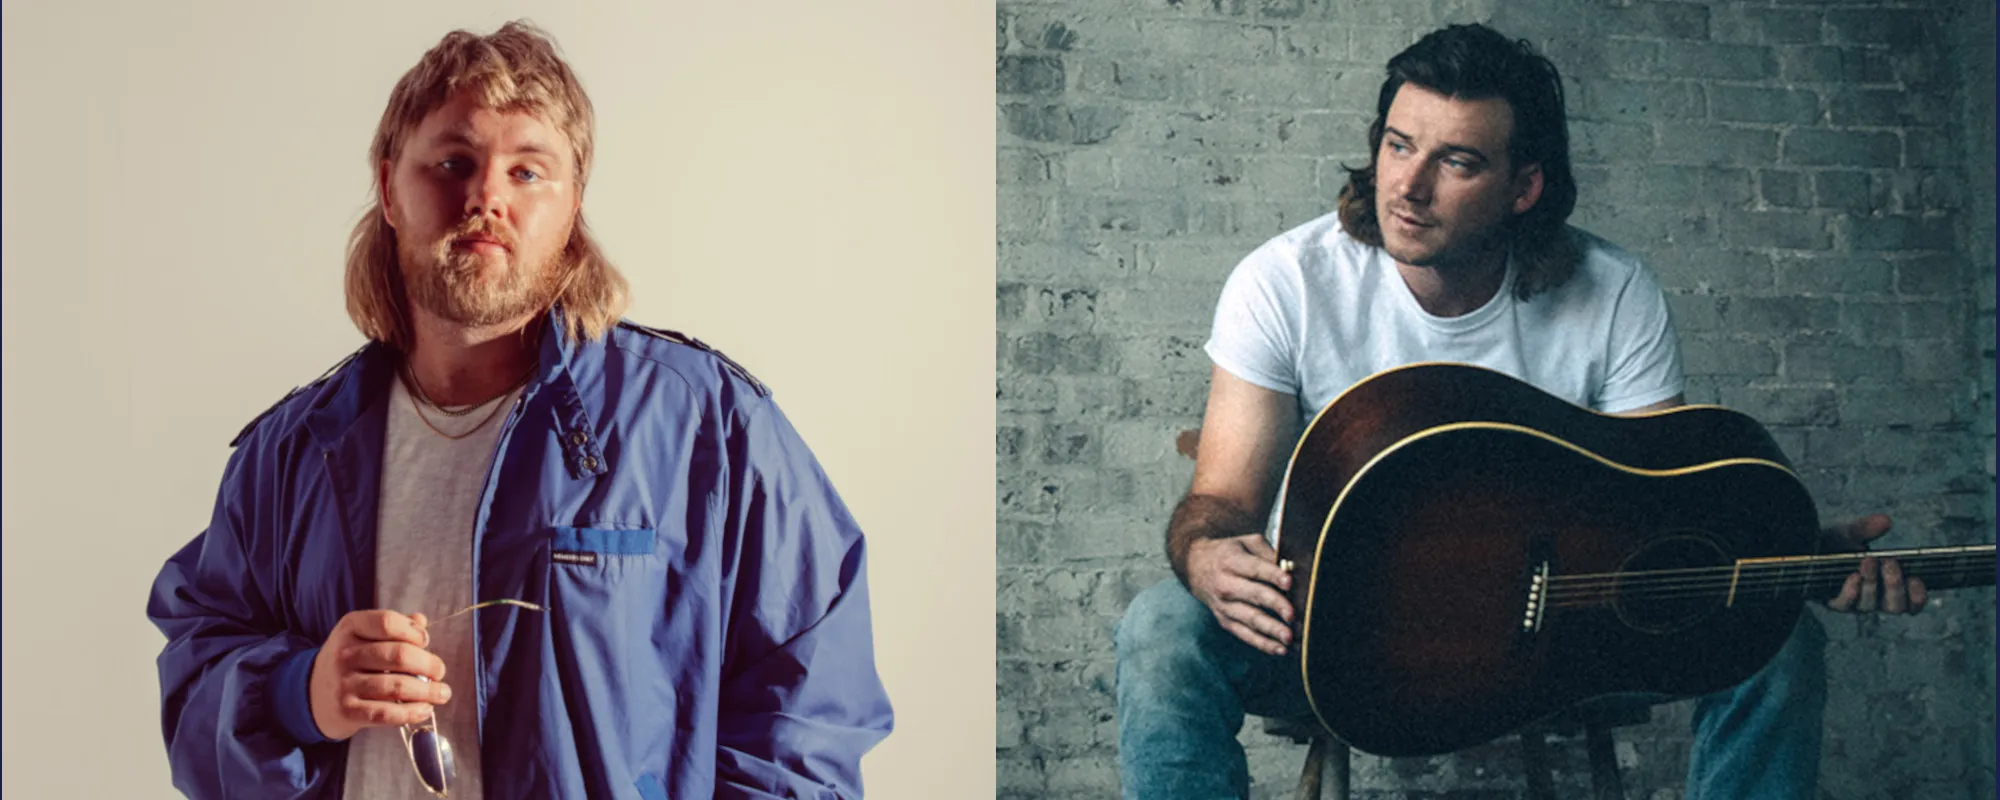 Morgan Wallen Teams Up with Ernest for Midnight Release of “Flower Shops”